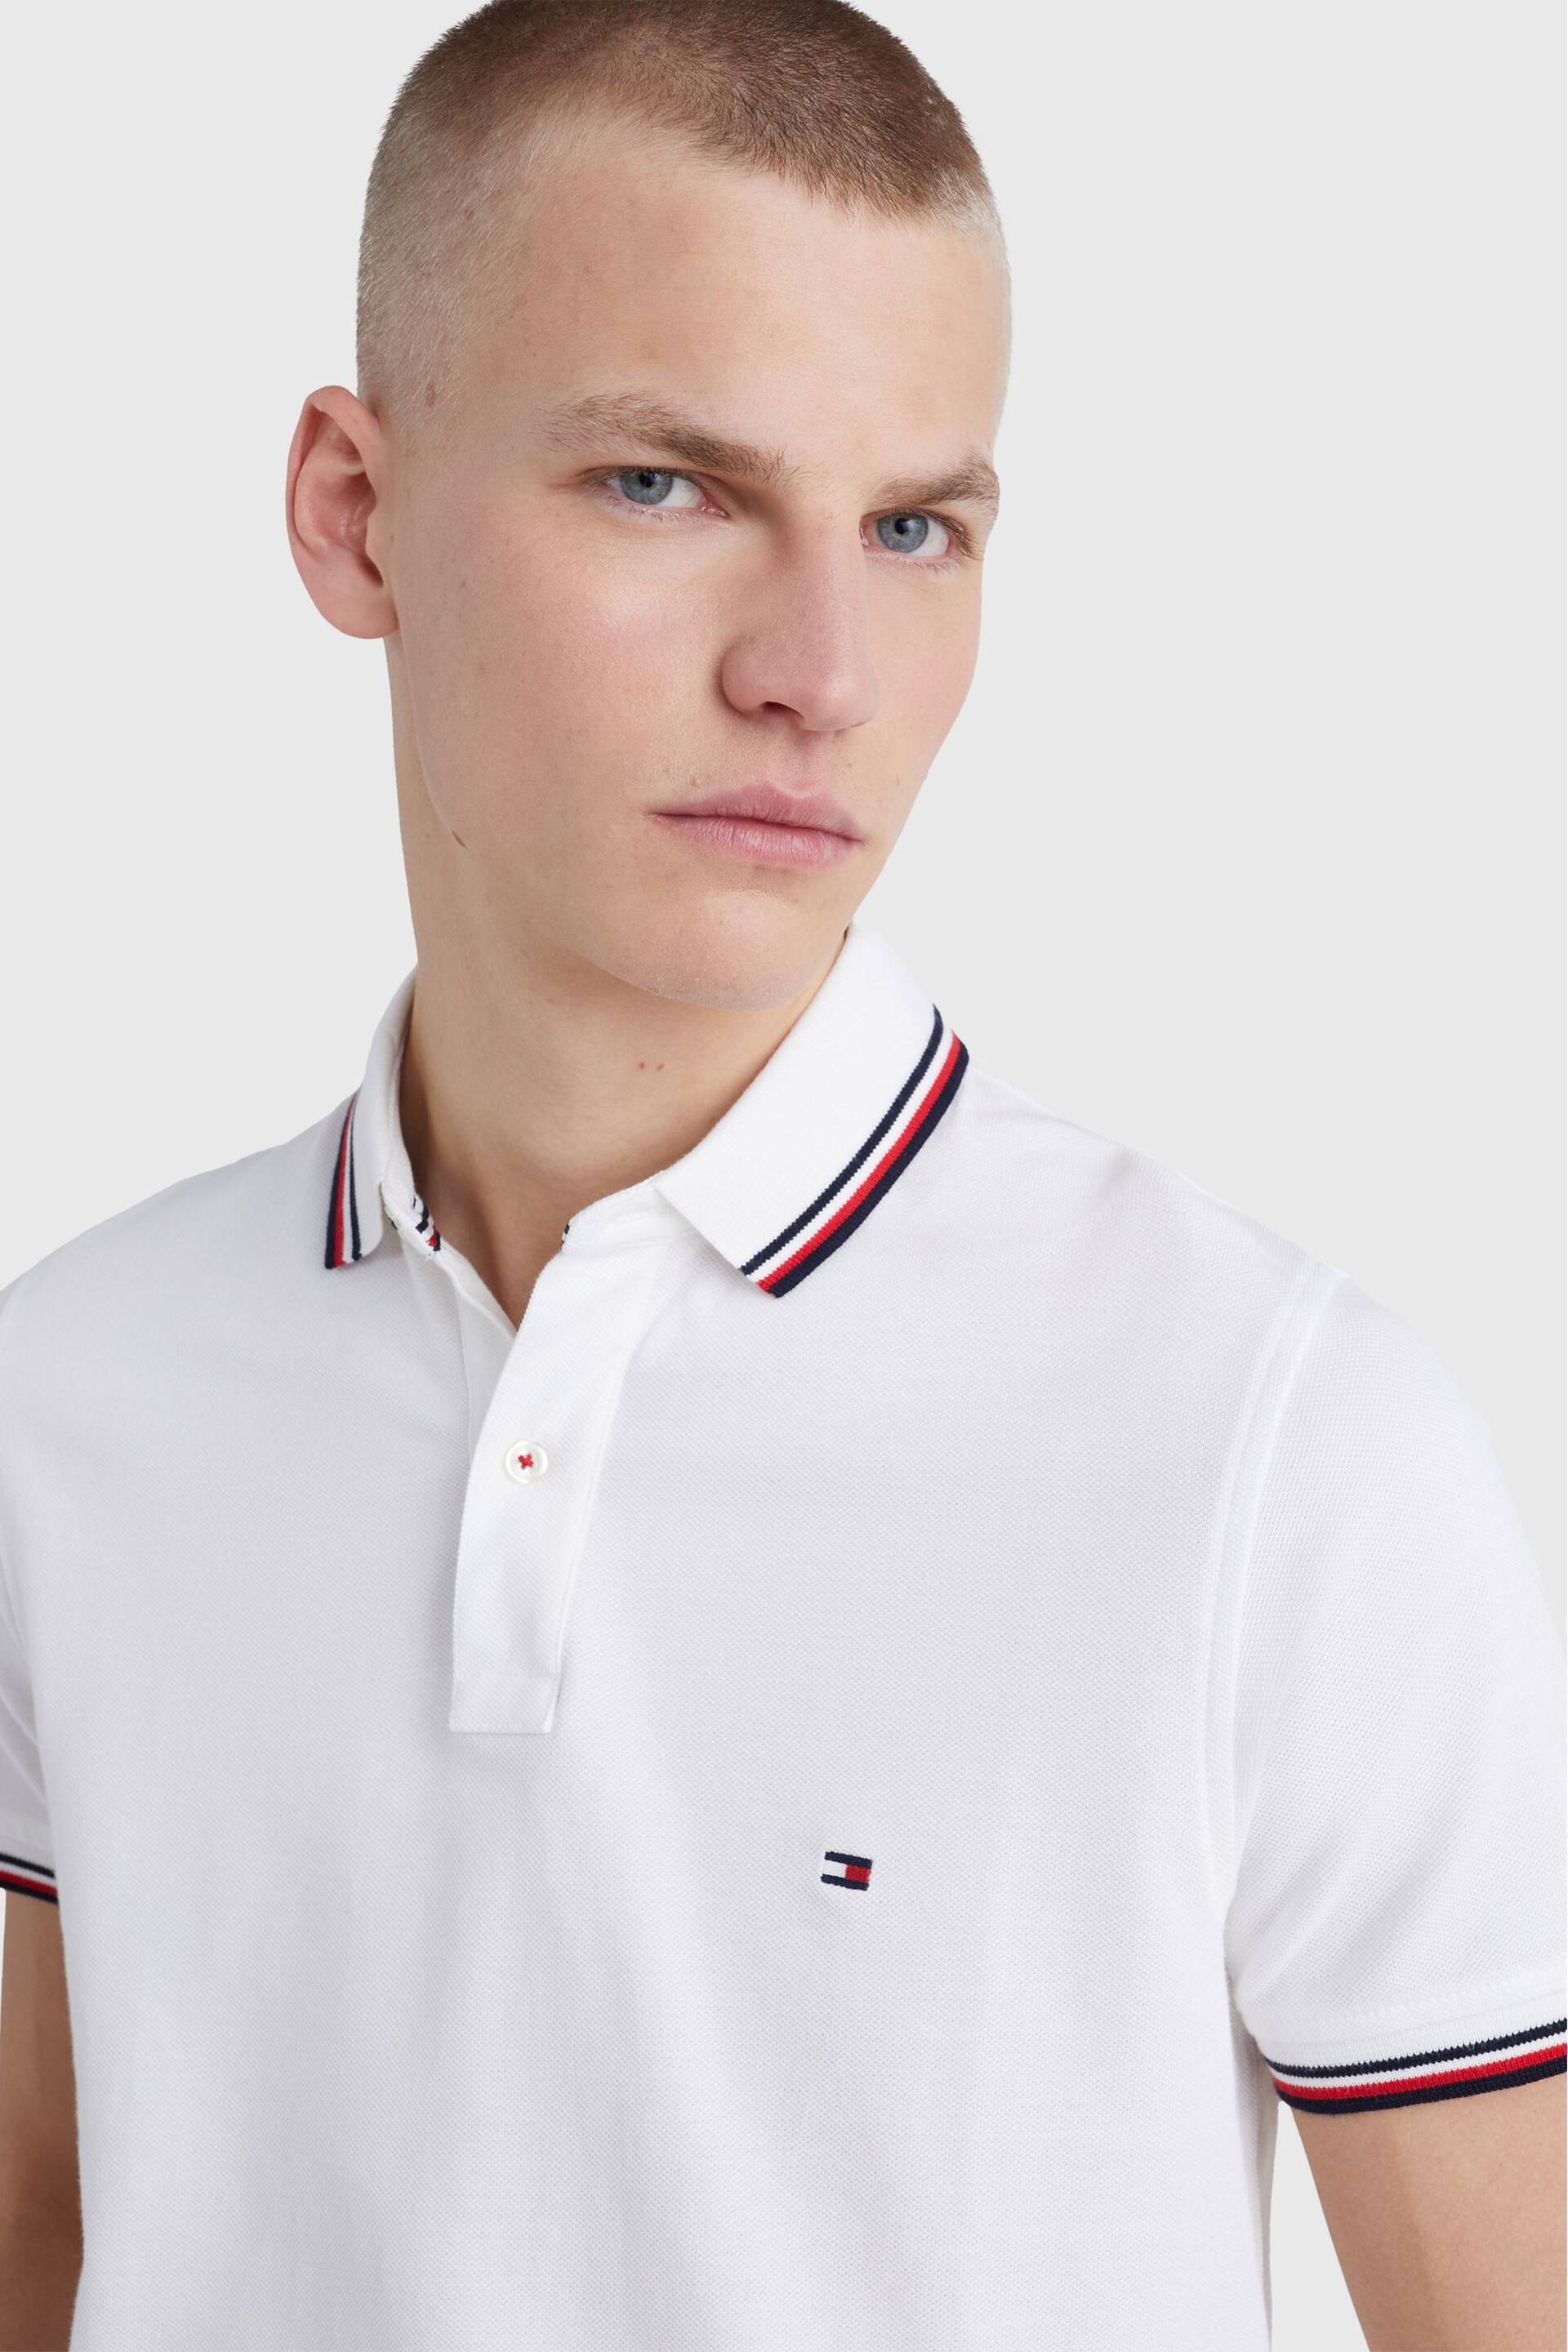 Tommy Hilfiger Organic Cotton Slim Fit White Polo Shirt - Image 3 of 5